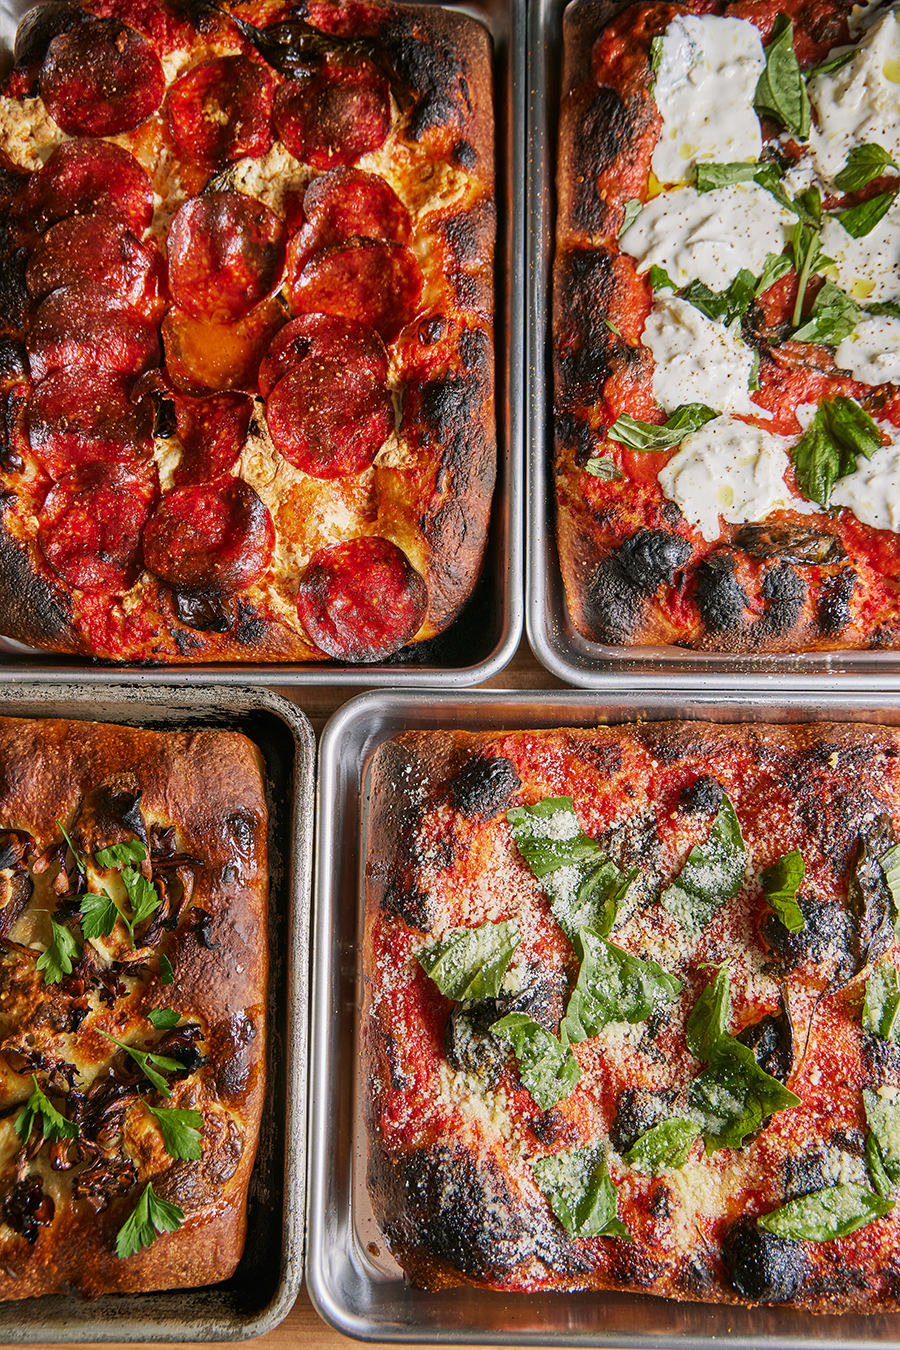 Overhead view of four thick-crust rectangular pizzas in silver trays.